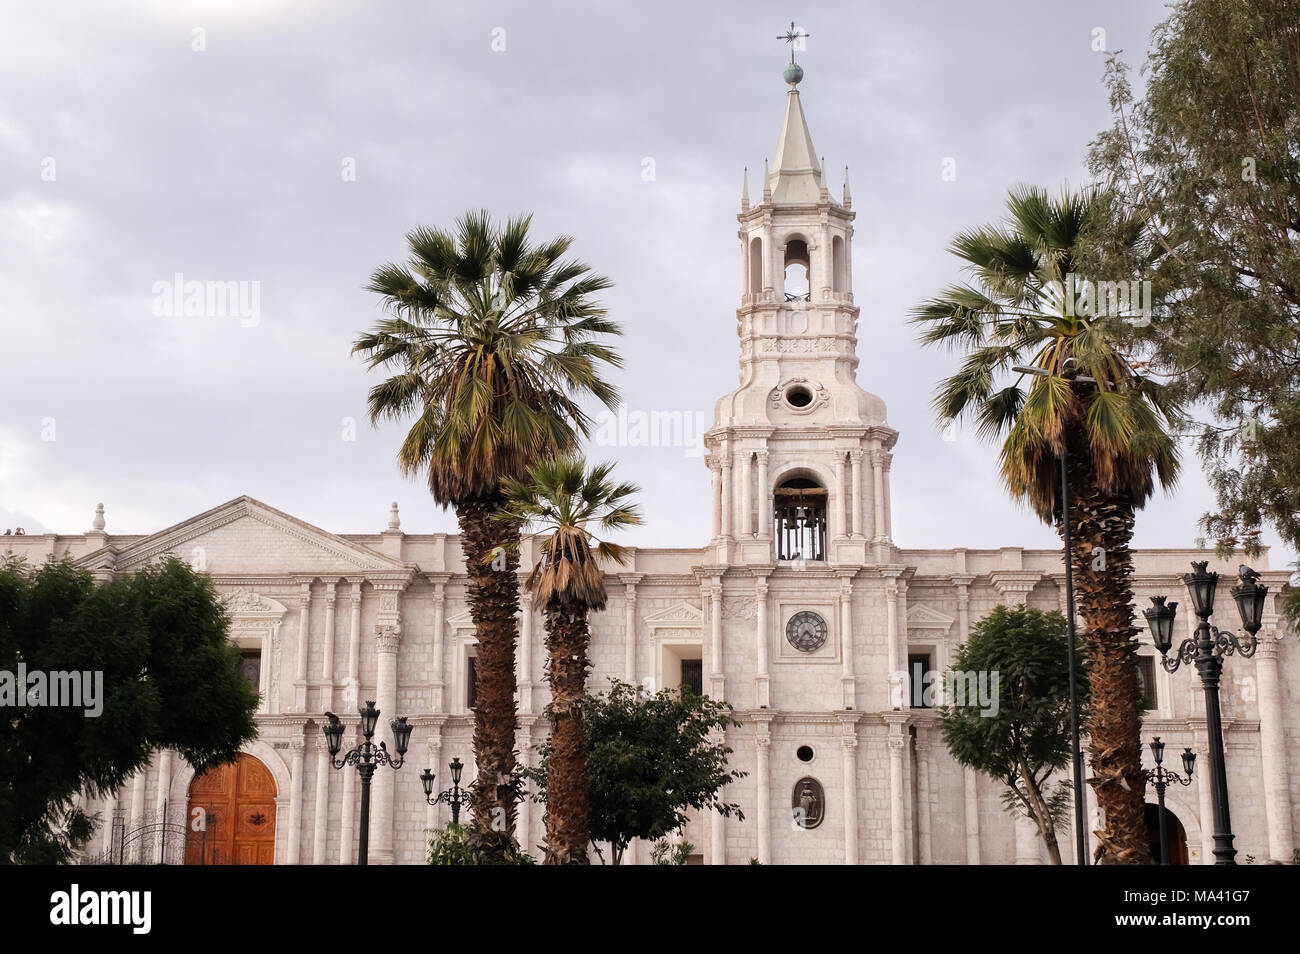 The Basilica Cathedral, a popular landmark at the plaza of Arequipa, Peru Stock Photo